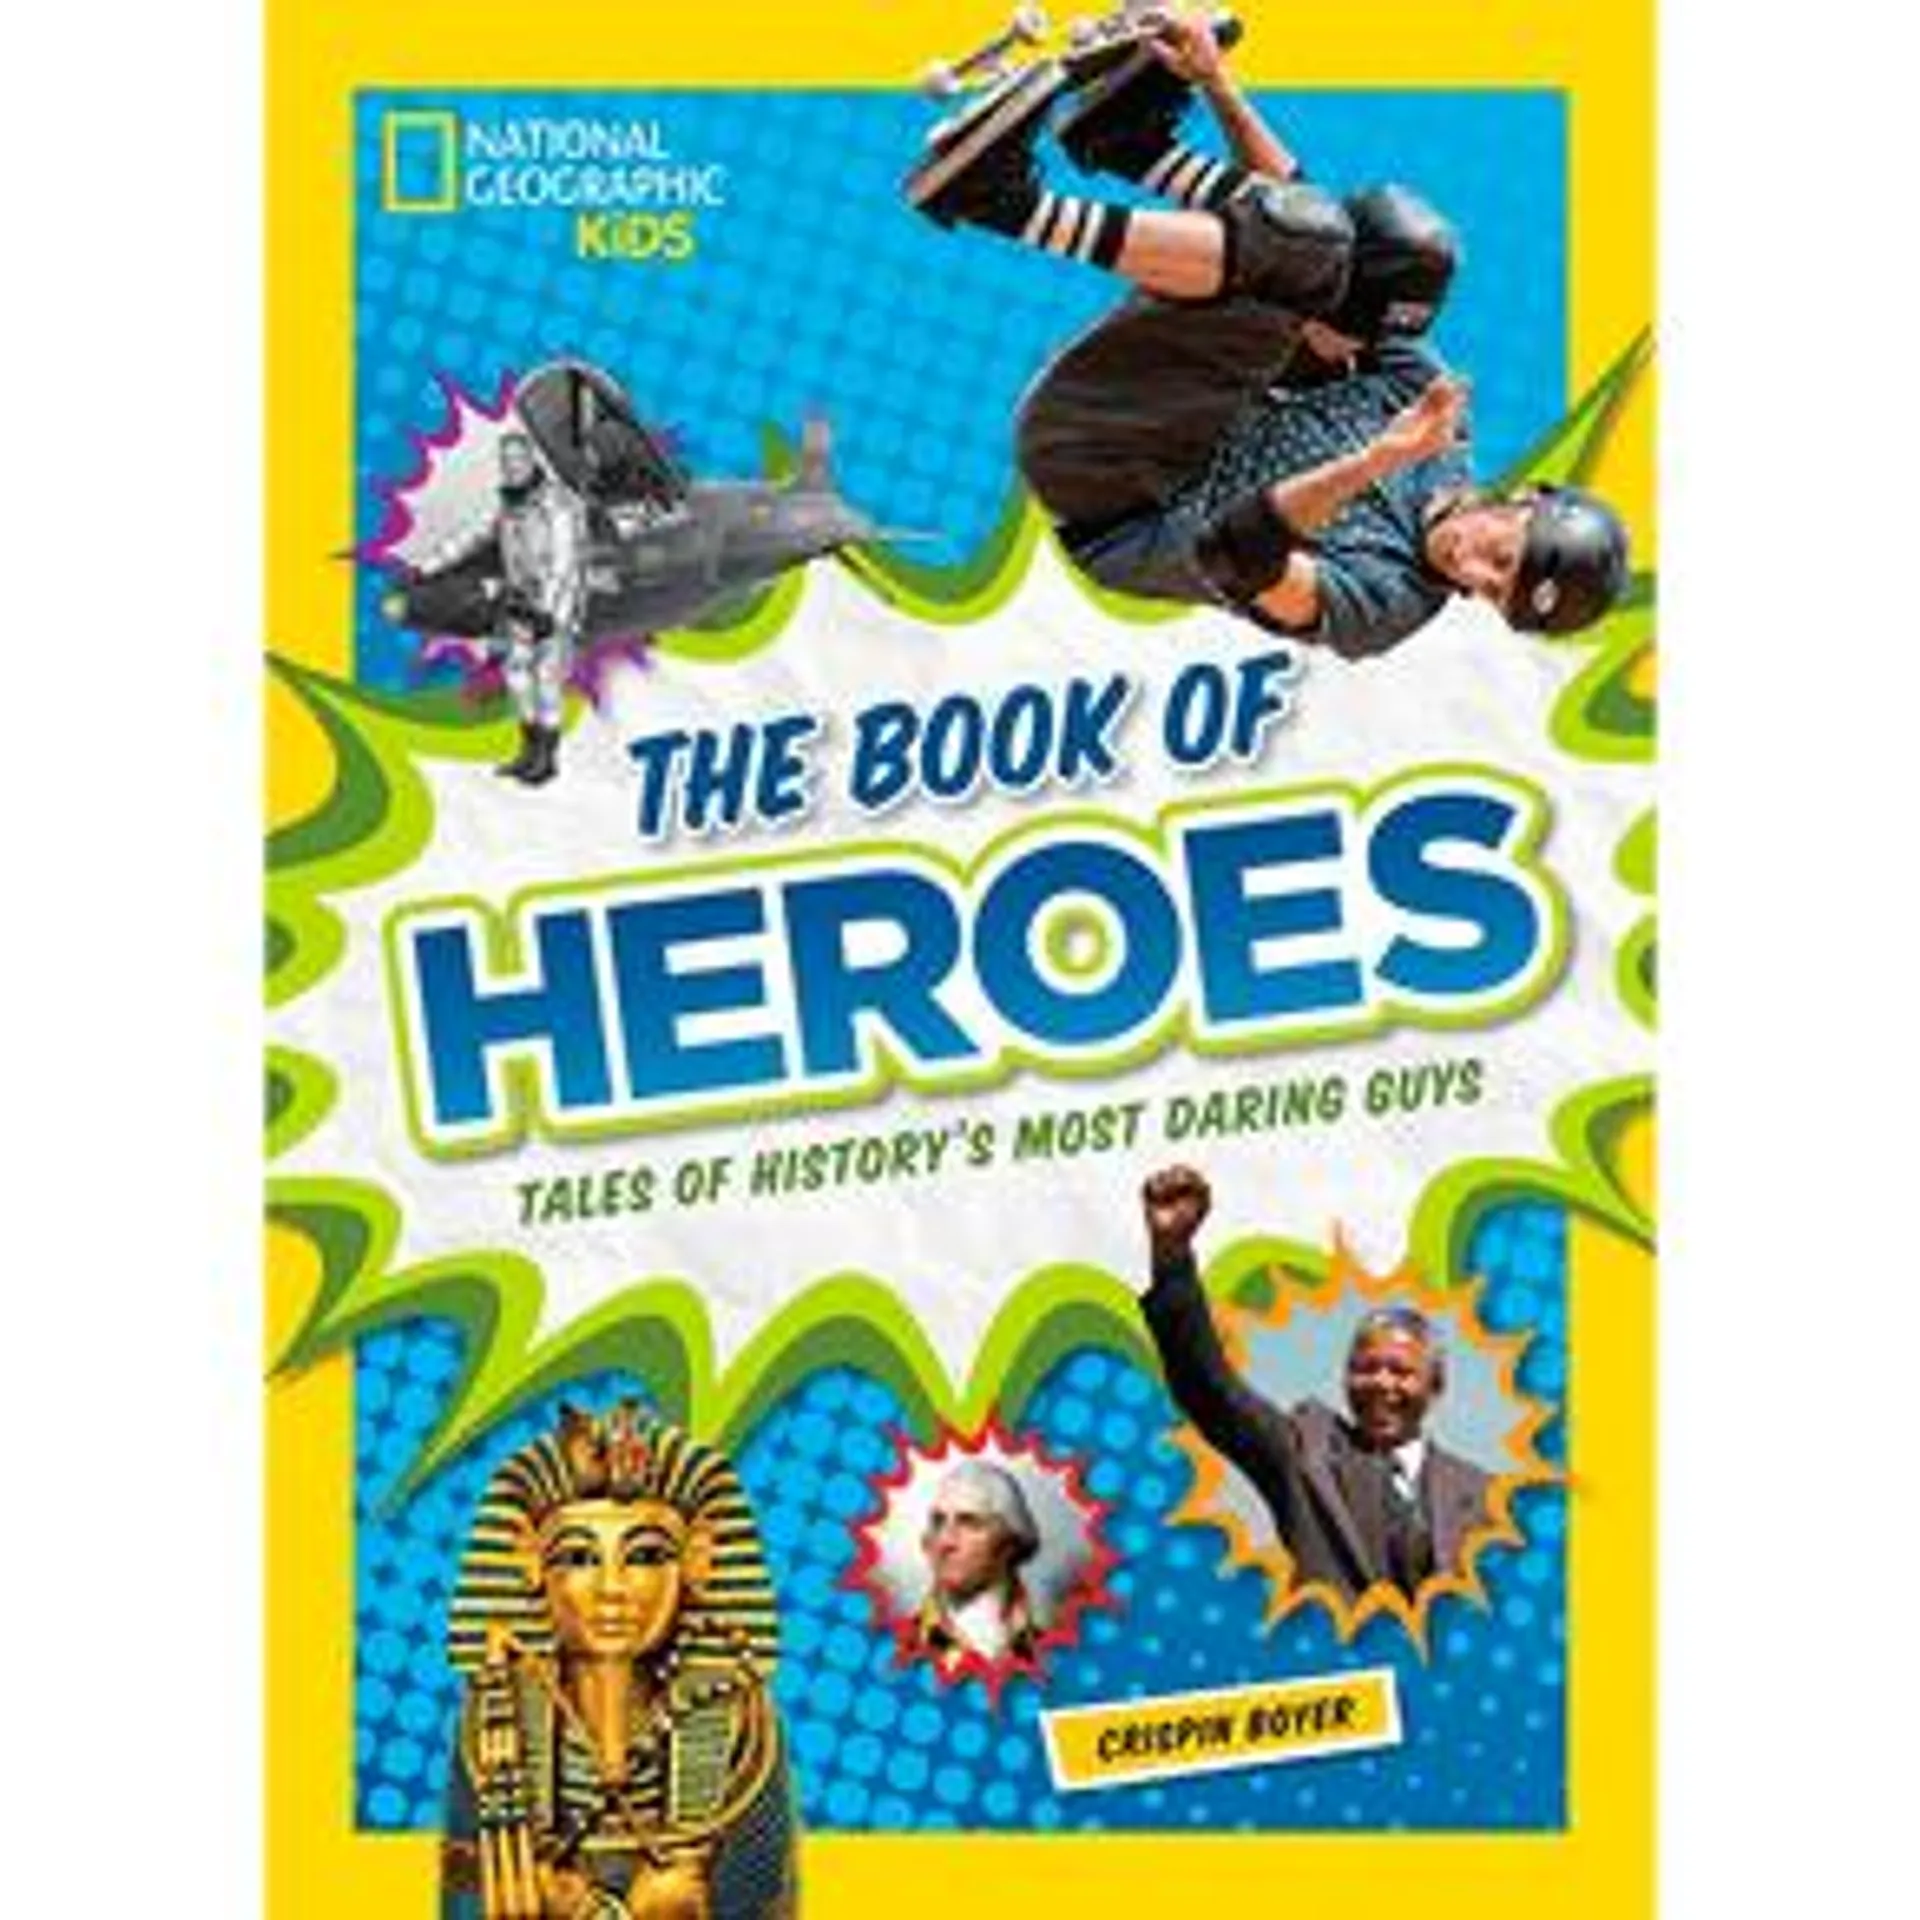 The Book of Heroes: Tales of History's Most Daring Dudes